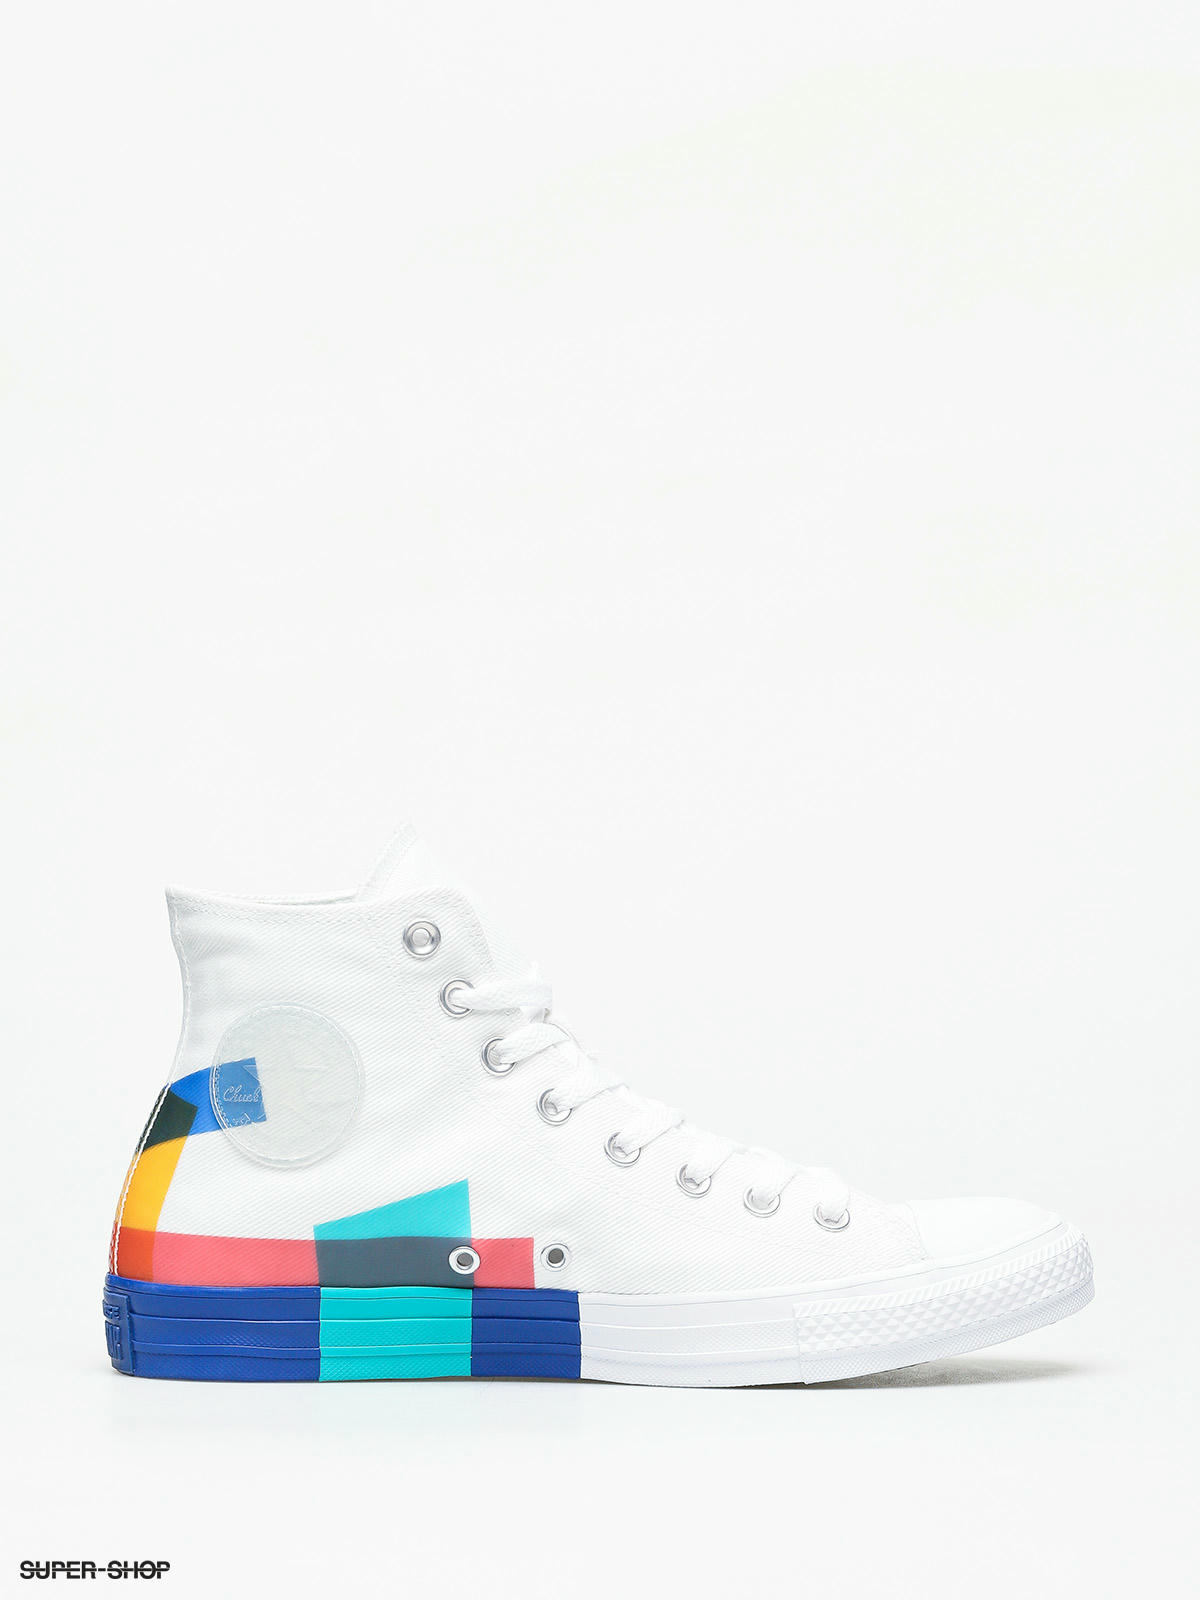 chuck taylor all star space racer low top